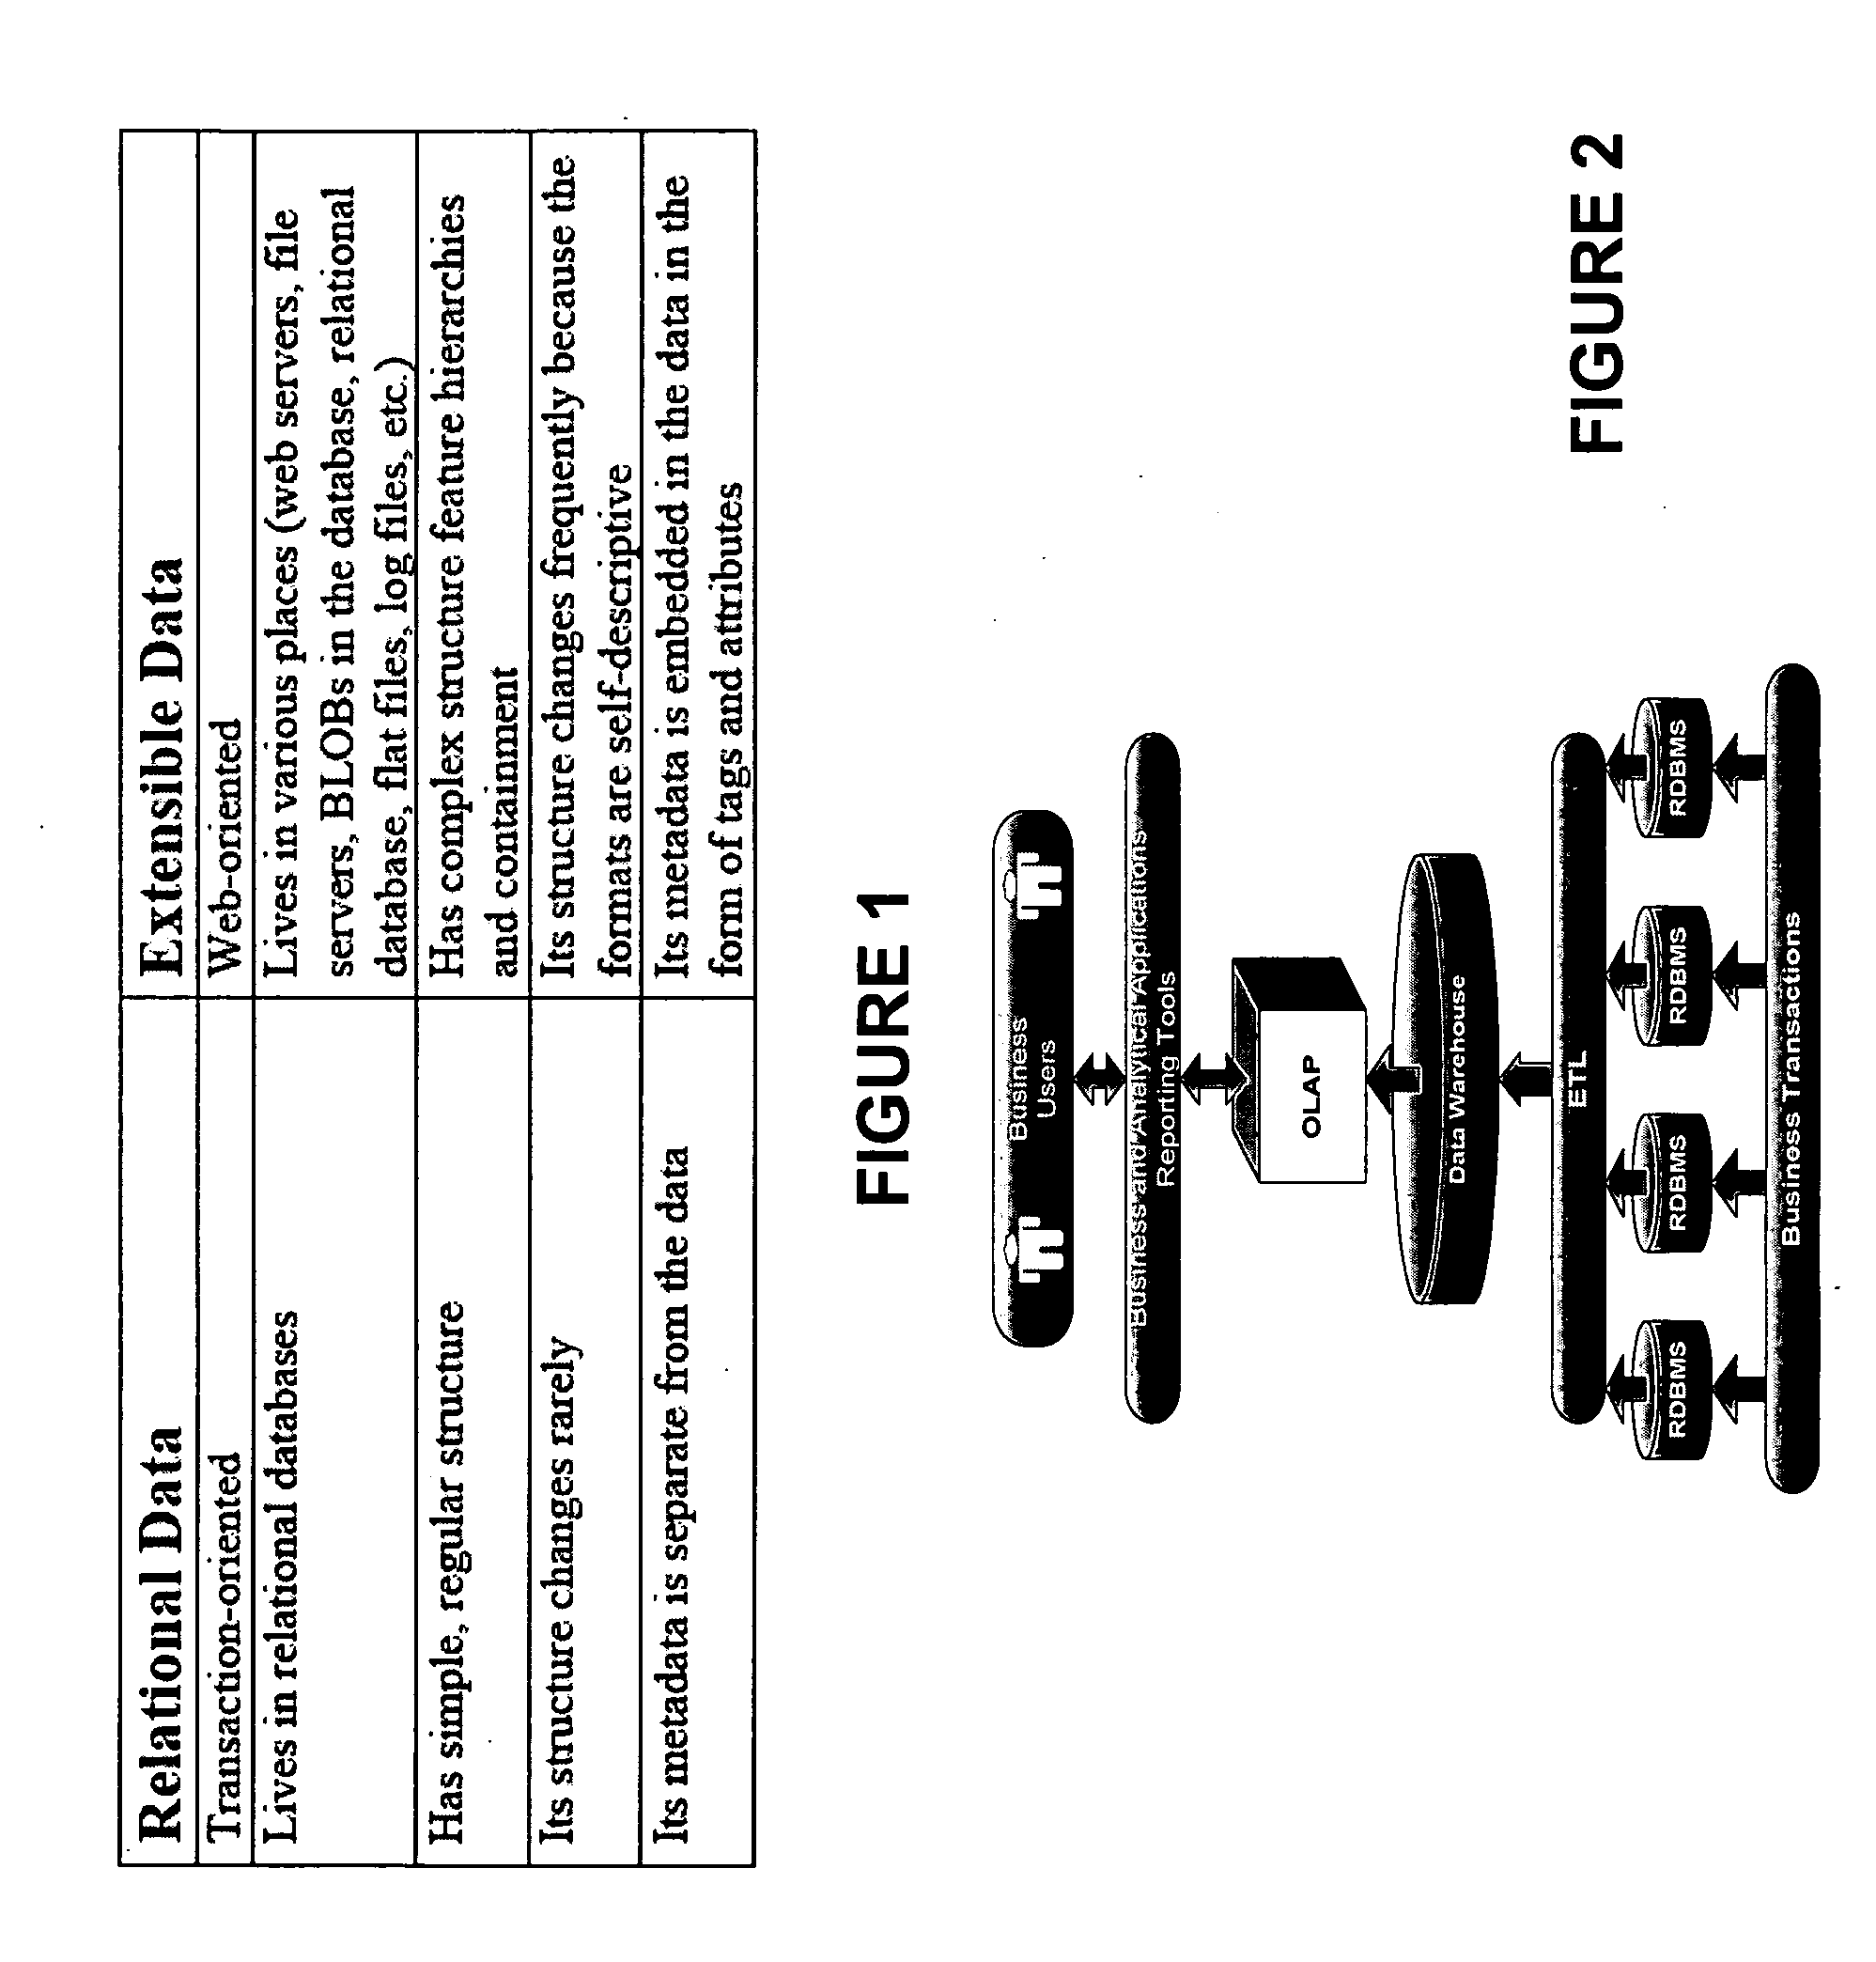 System and method for analyzing and reporting extensible data from multiple sources in multiple formats